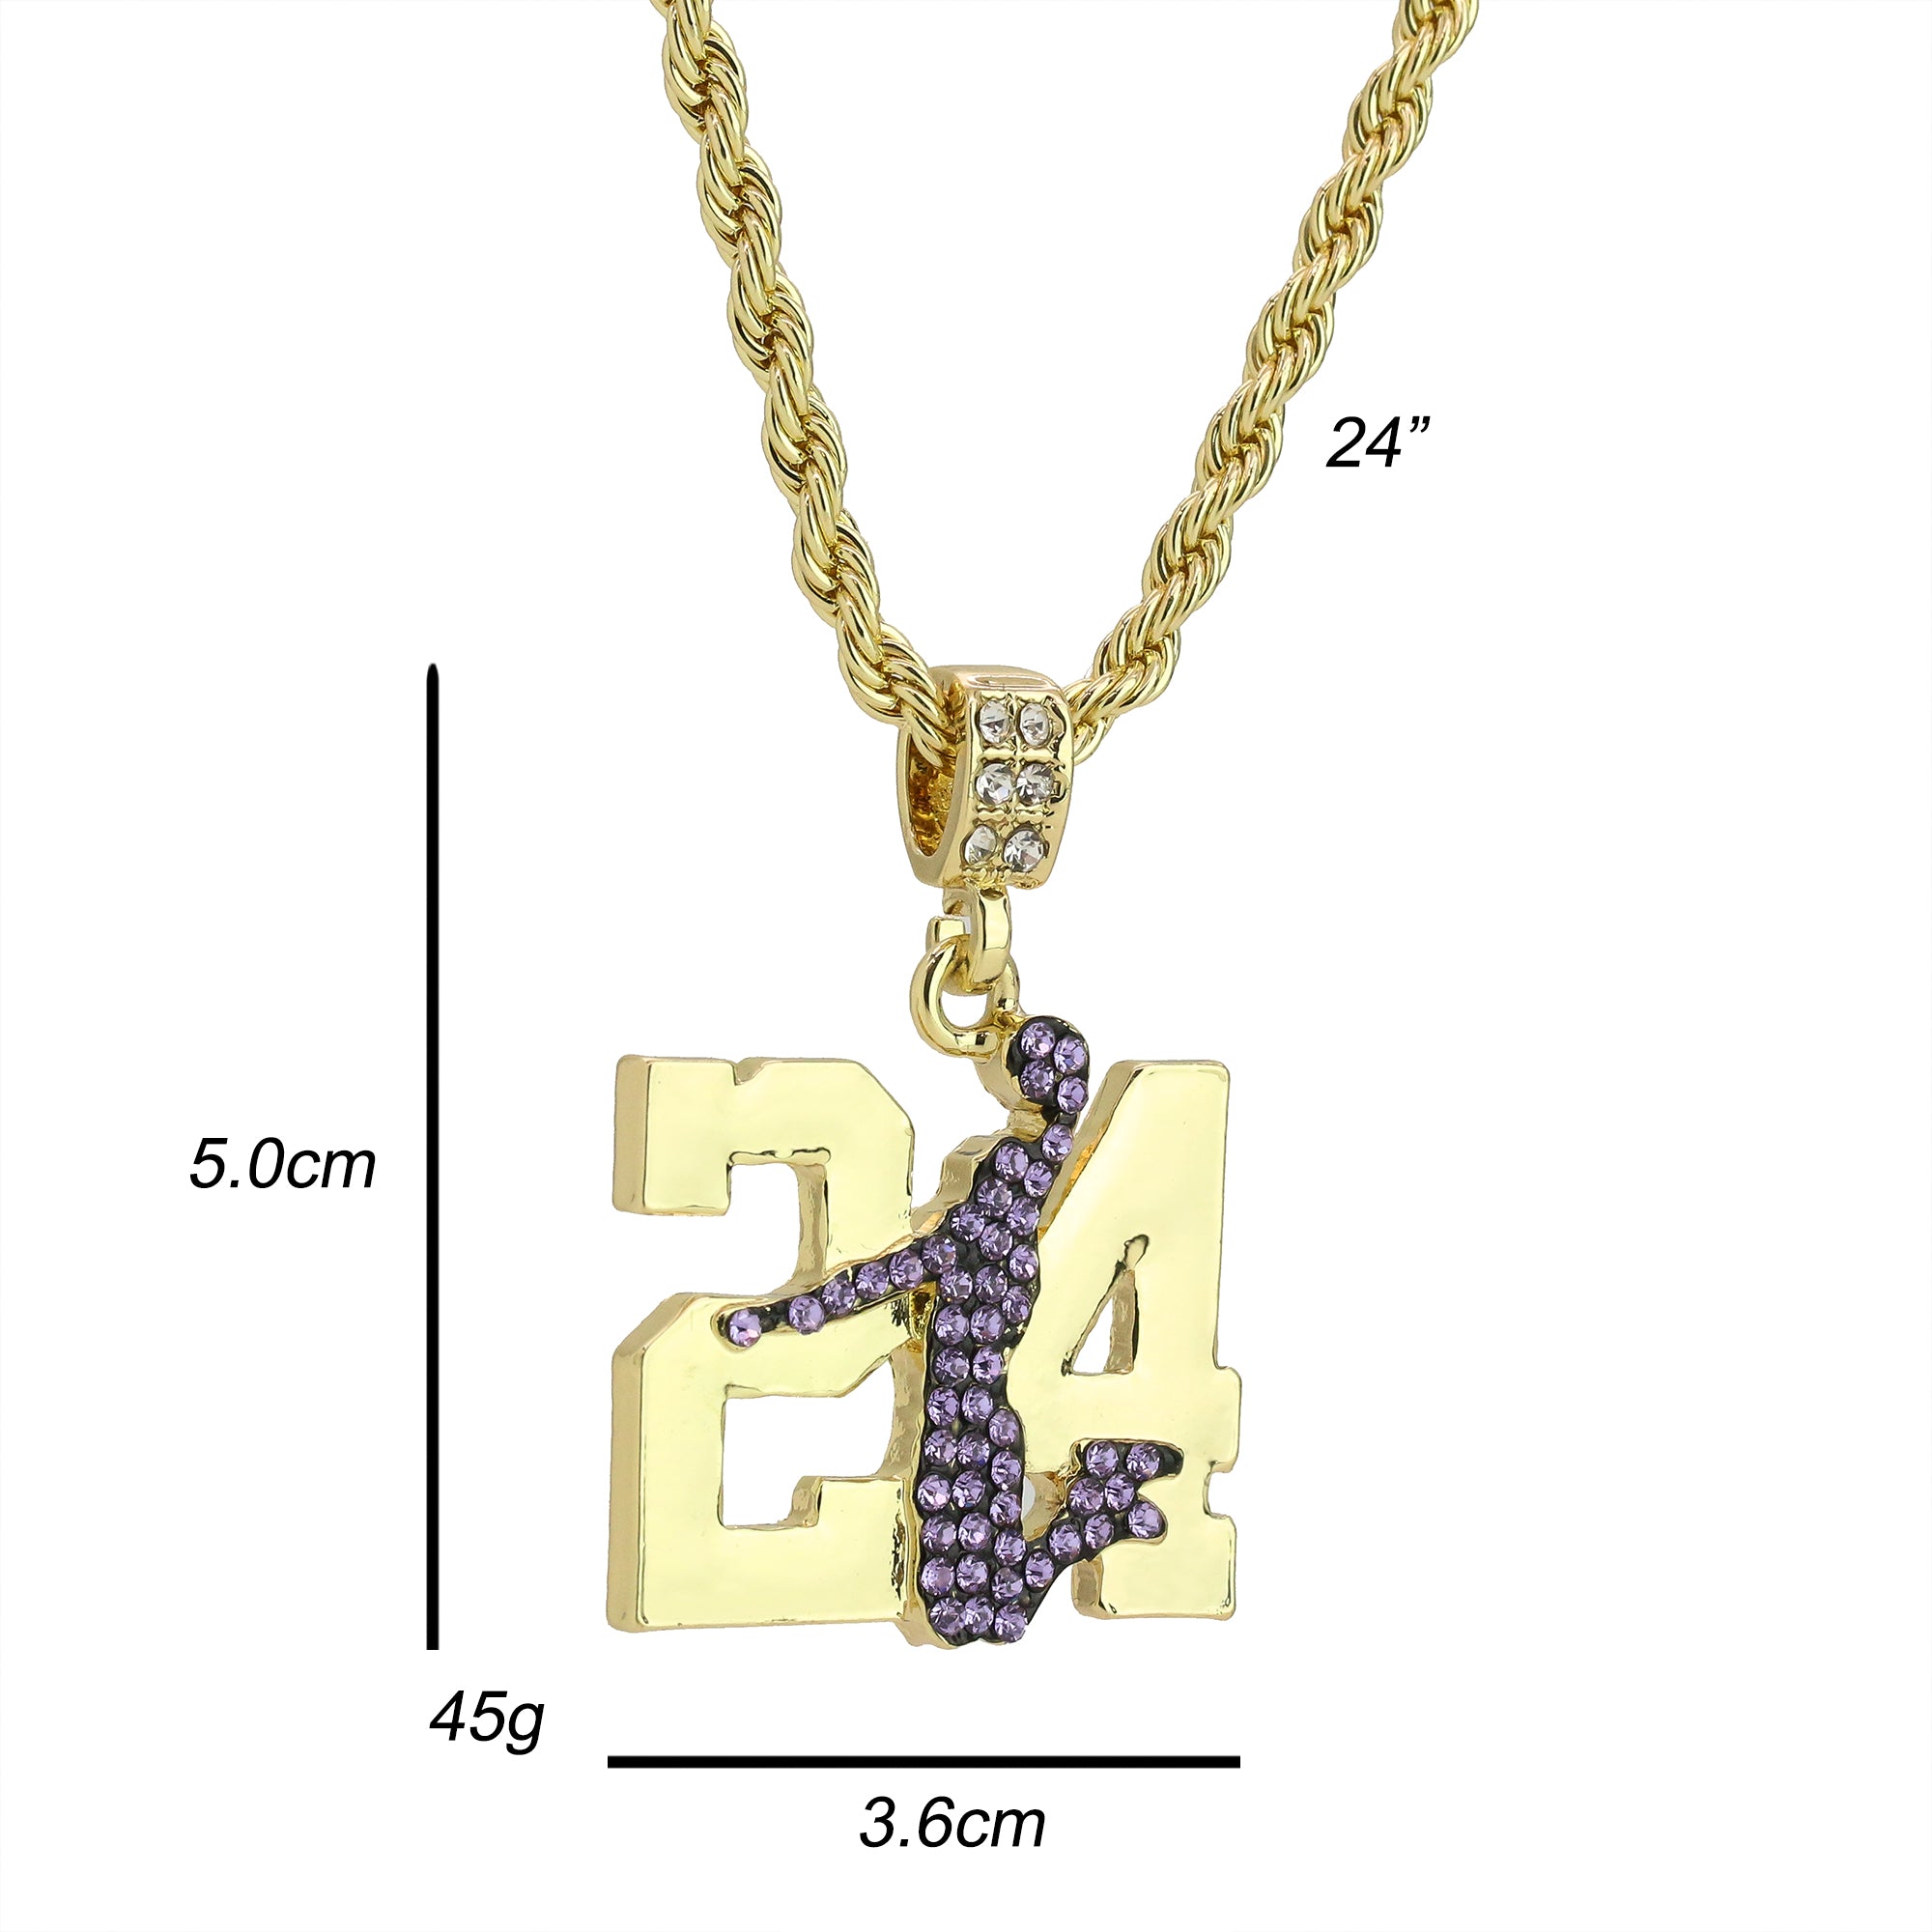 PP Cz 24 Jump Pendant 24" Rope Chain Men's Hip Hop Style 18k Jewelry Necklace